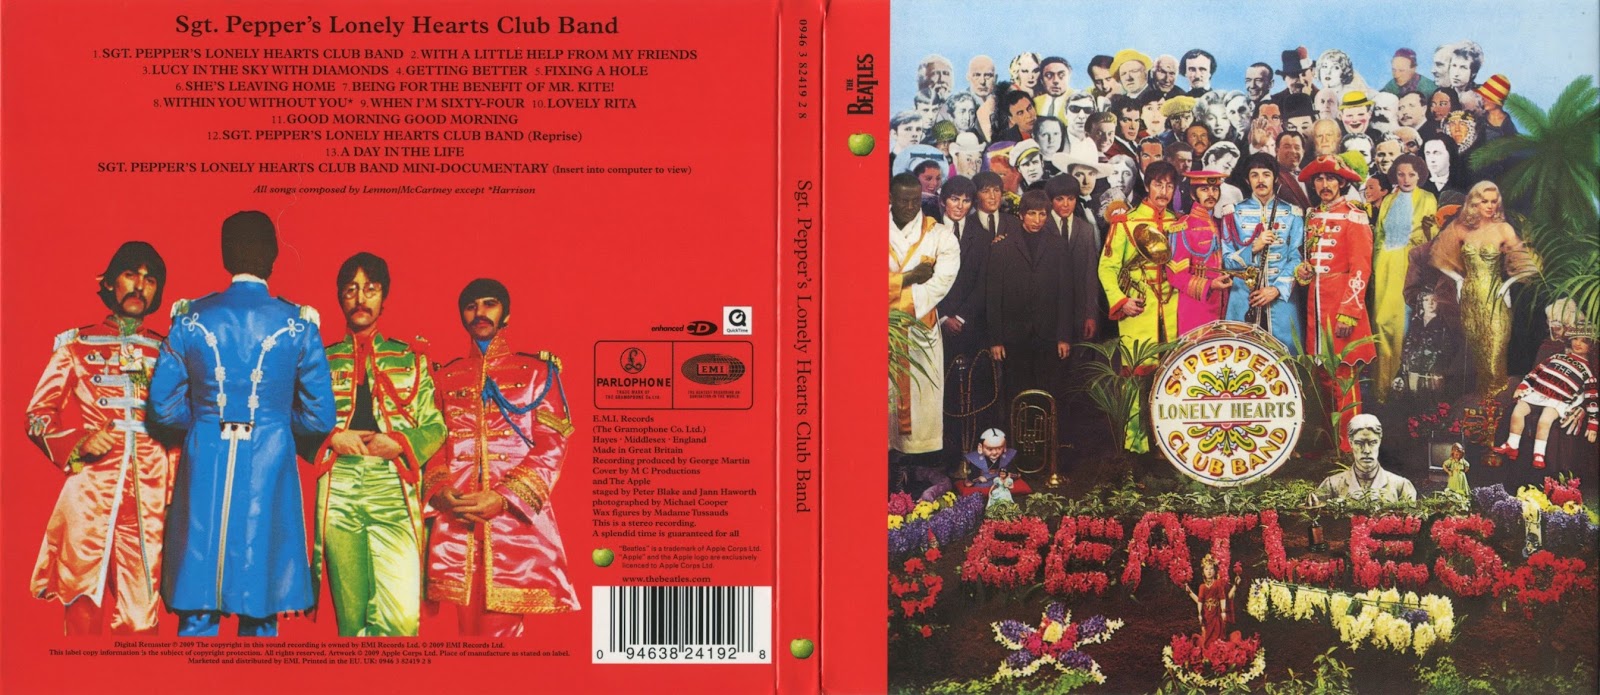 Beatles sgt peppers lonely hearts club. The Beatles Sgt. Pepper's Lonely Hearts Club Band 1967. The Beatles Sgt. Pepper's Lonely Hearts Club Band обложка CD. Sgt Pepper s Lonely Hearts Club Band. Битлз Sgt Pepper s Lonely Hearts Club Band.